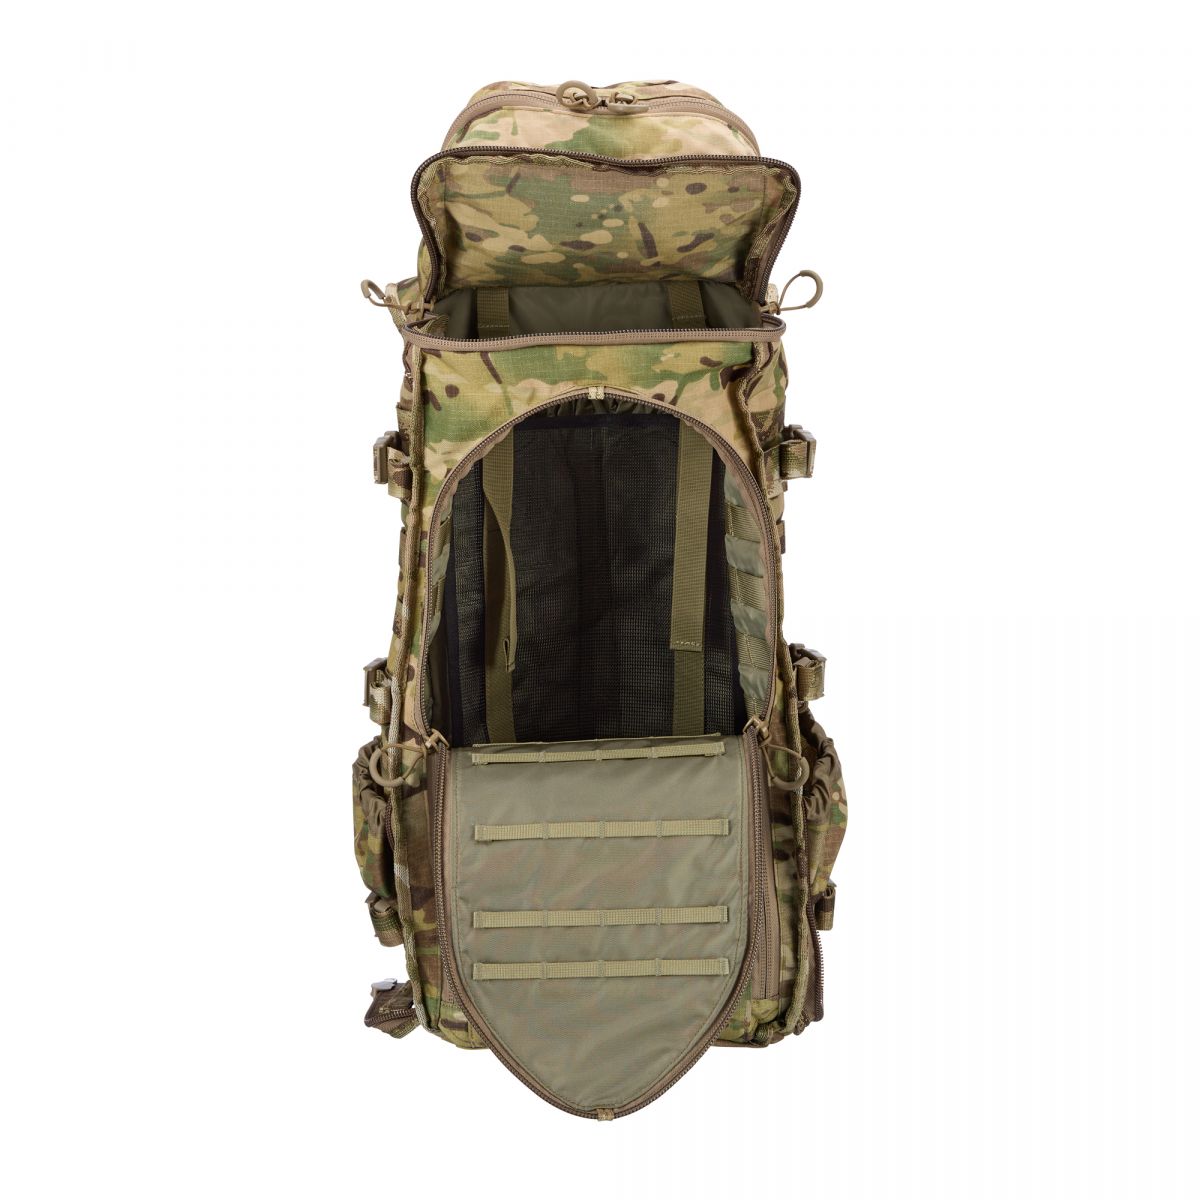 Purchase the Eberlestock Backpack Little Brother Pack multicam b